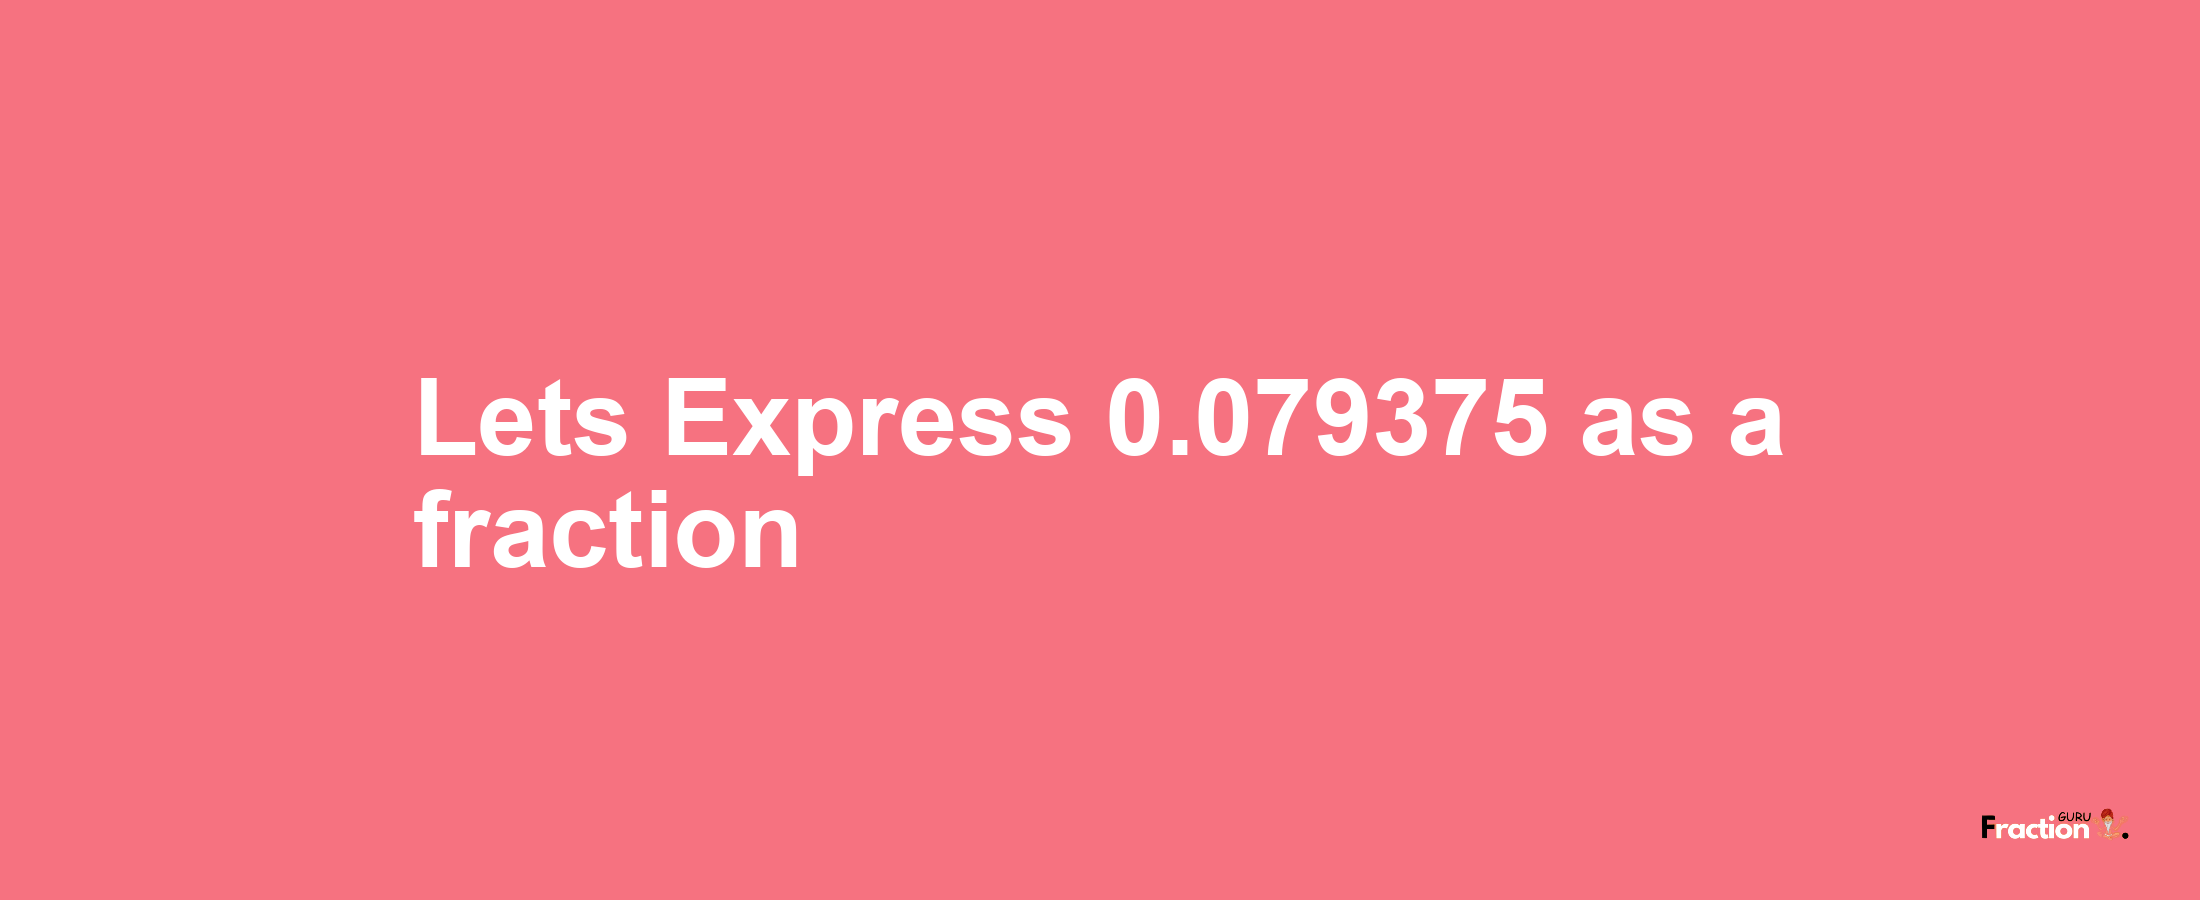 Lets Express 0.079375 as afraction